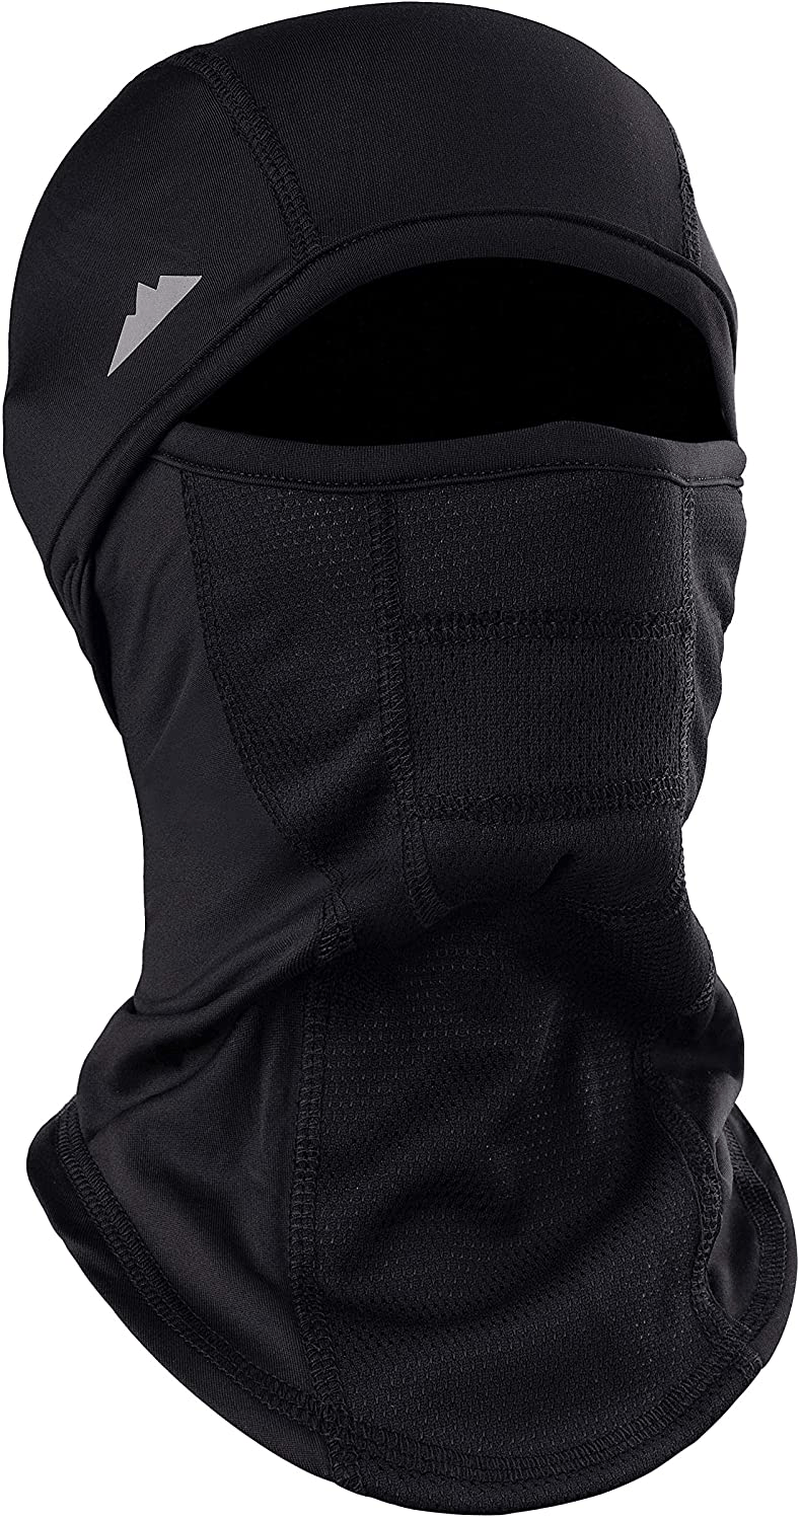 Balaclava Ski Mask - Winter Face Mask for Men & Women - Cold Weather Gear for Skiing, Snowboarding & Motorcycle Riding Black  Tough Headwear Default Title  